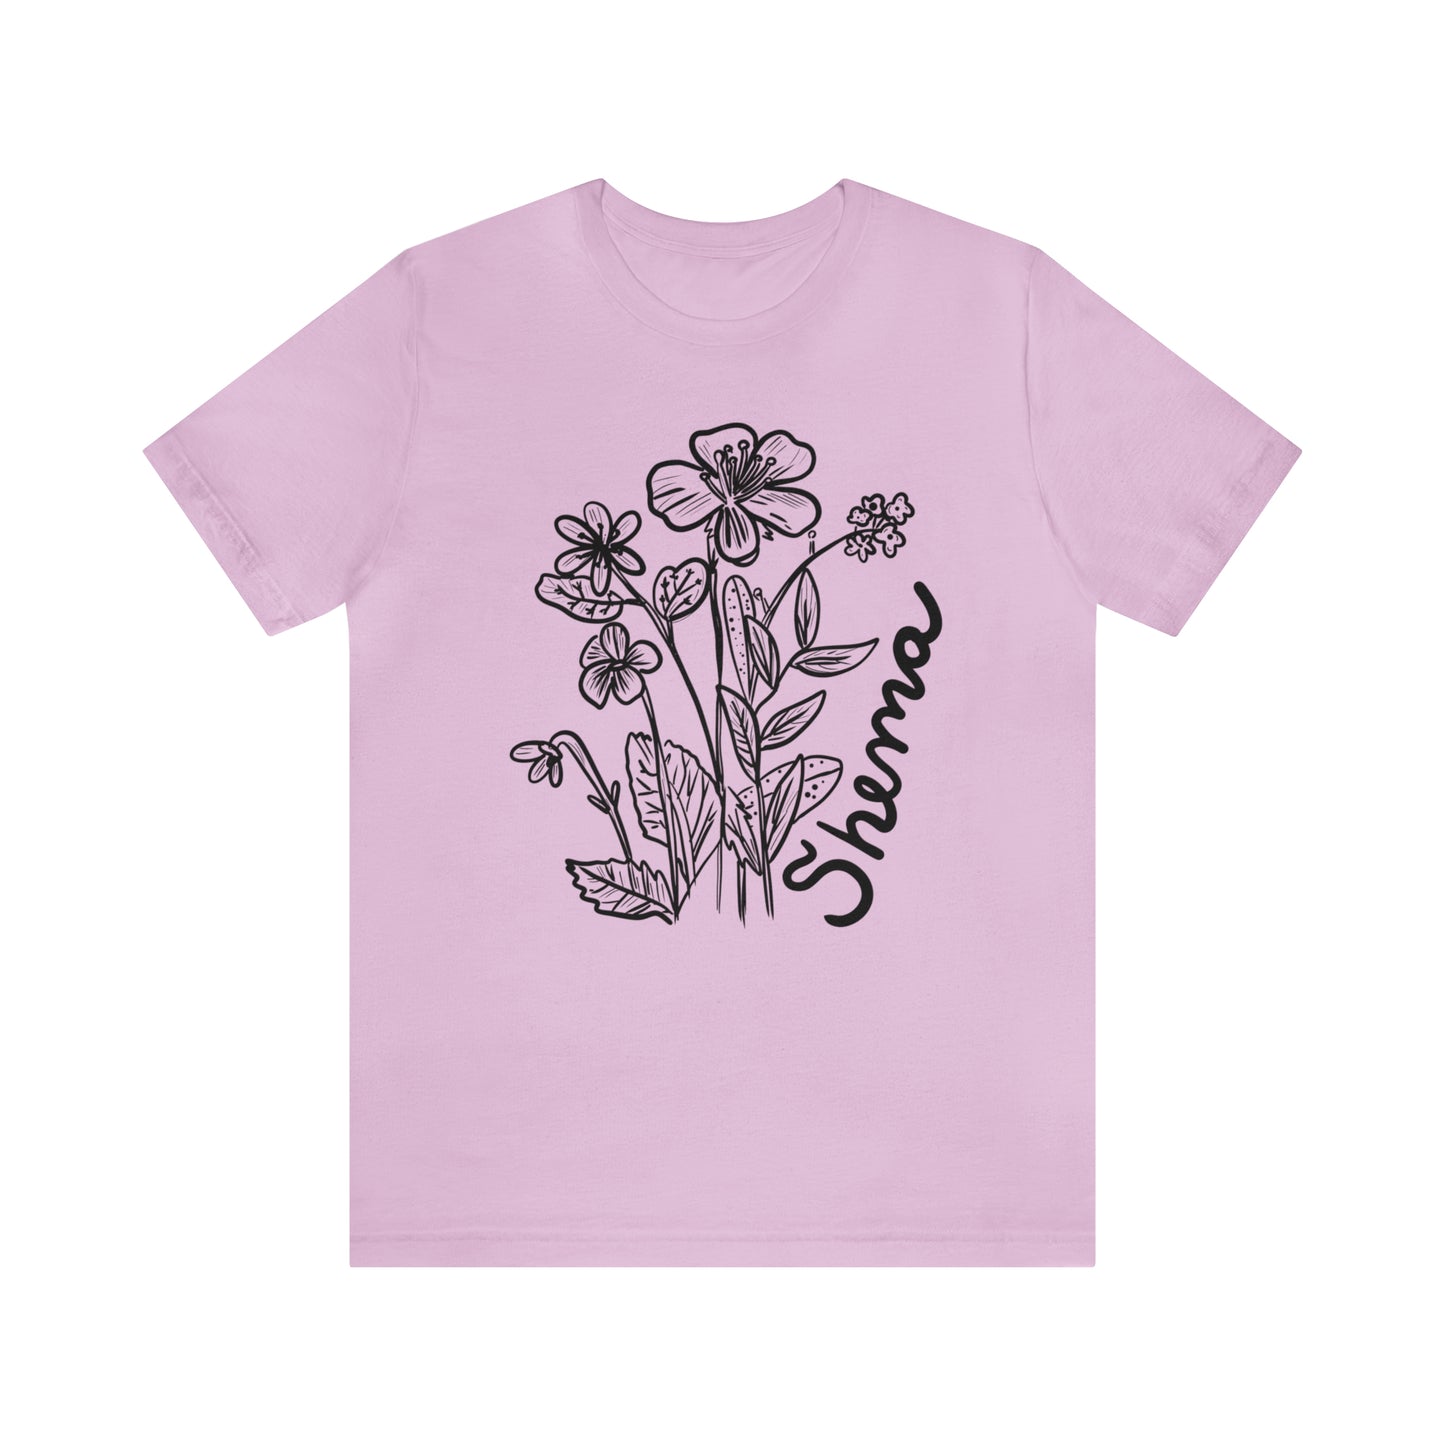 Flower Drawing Shema (Green Pastures Apparel)